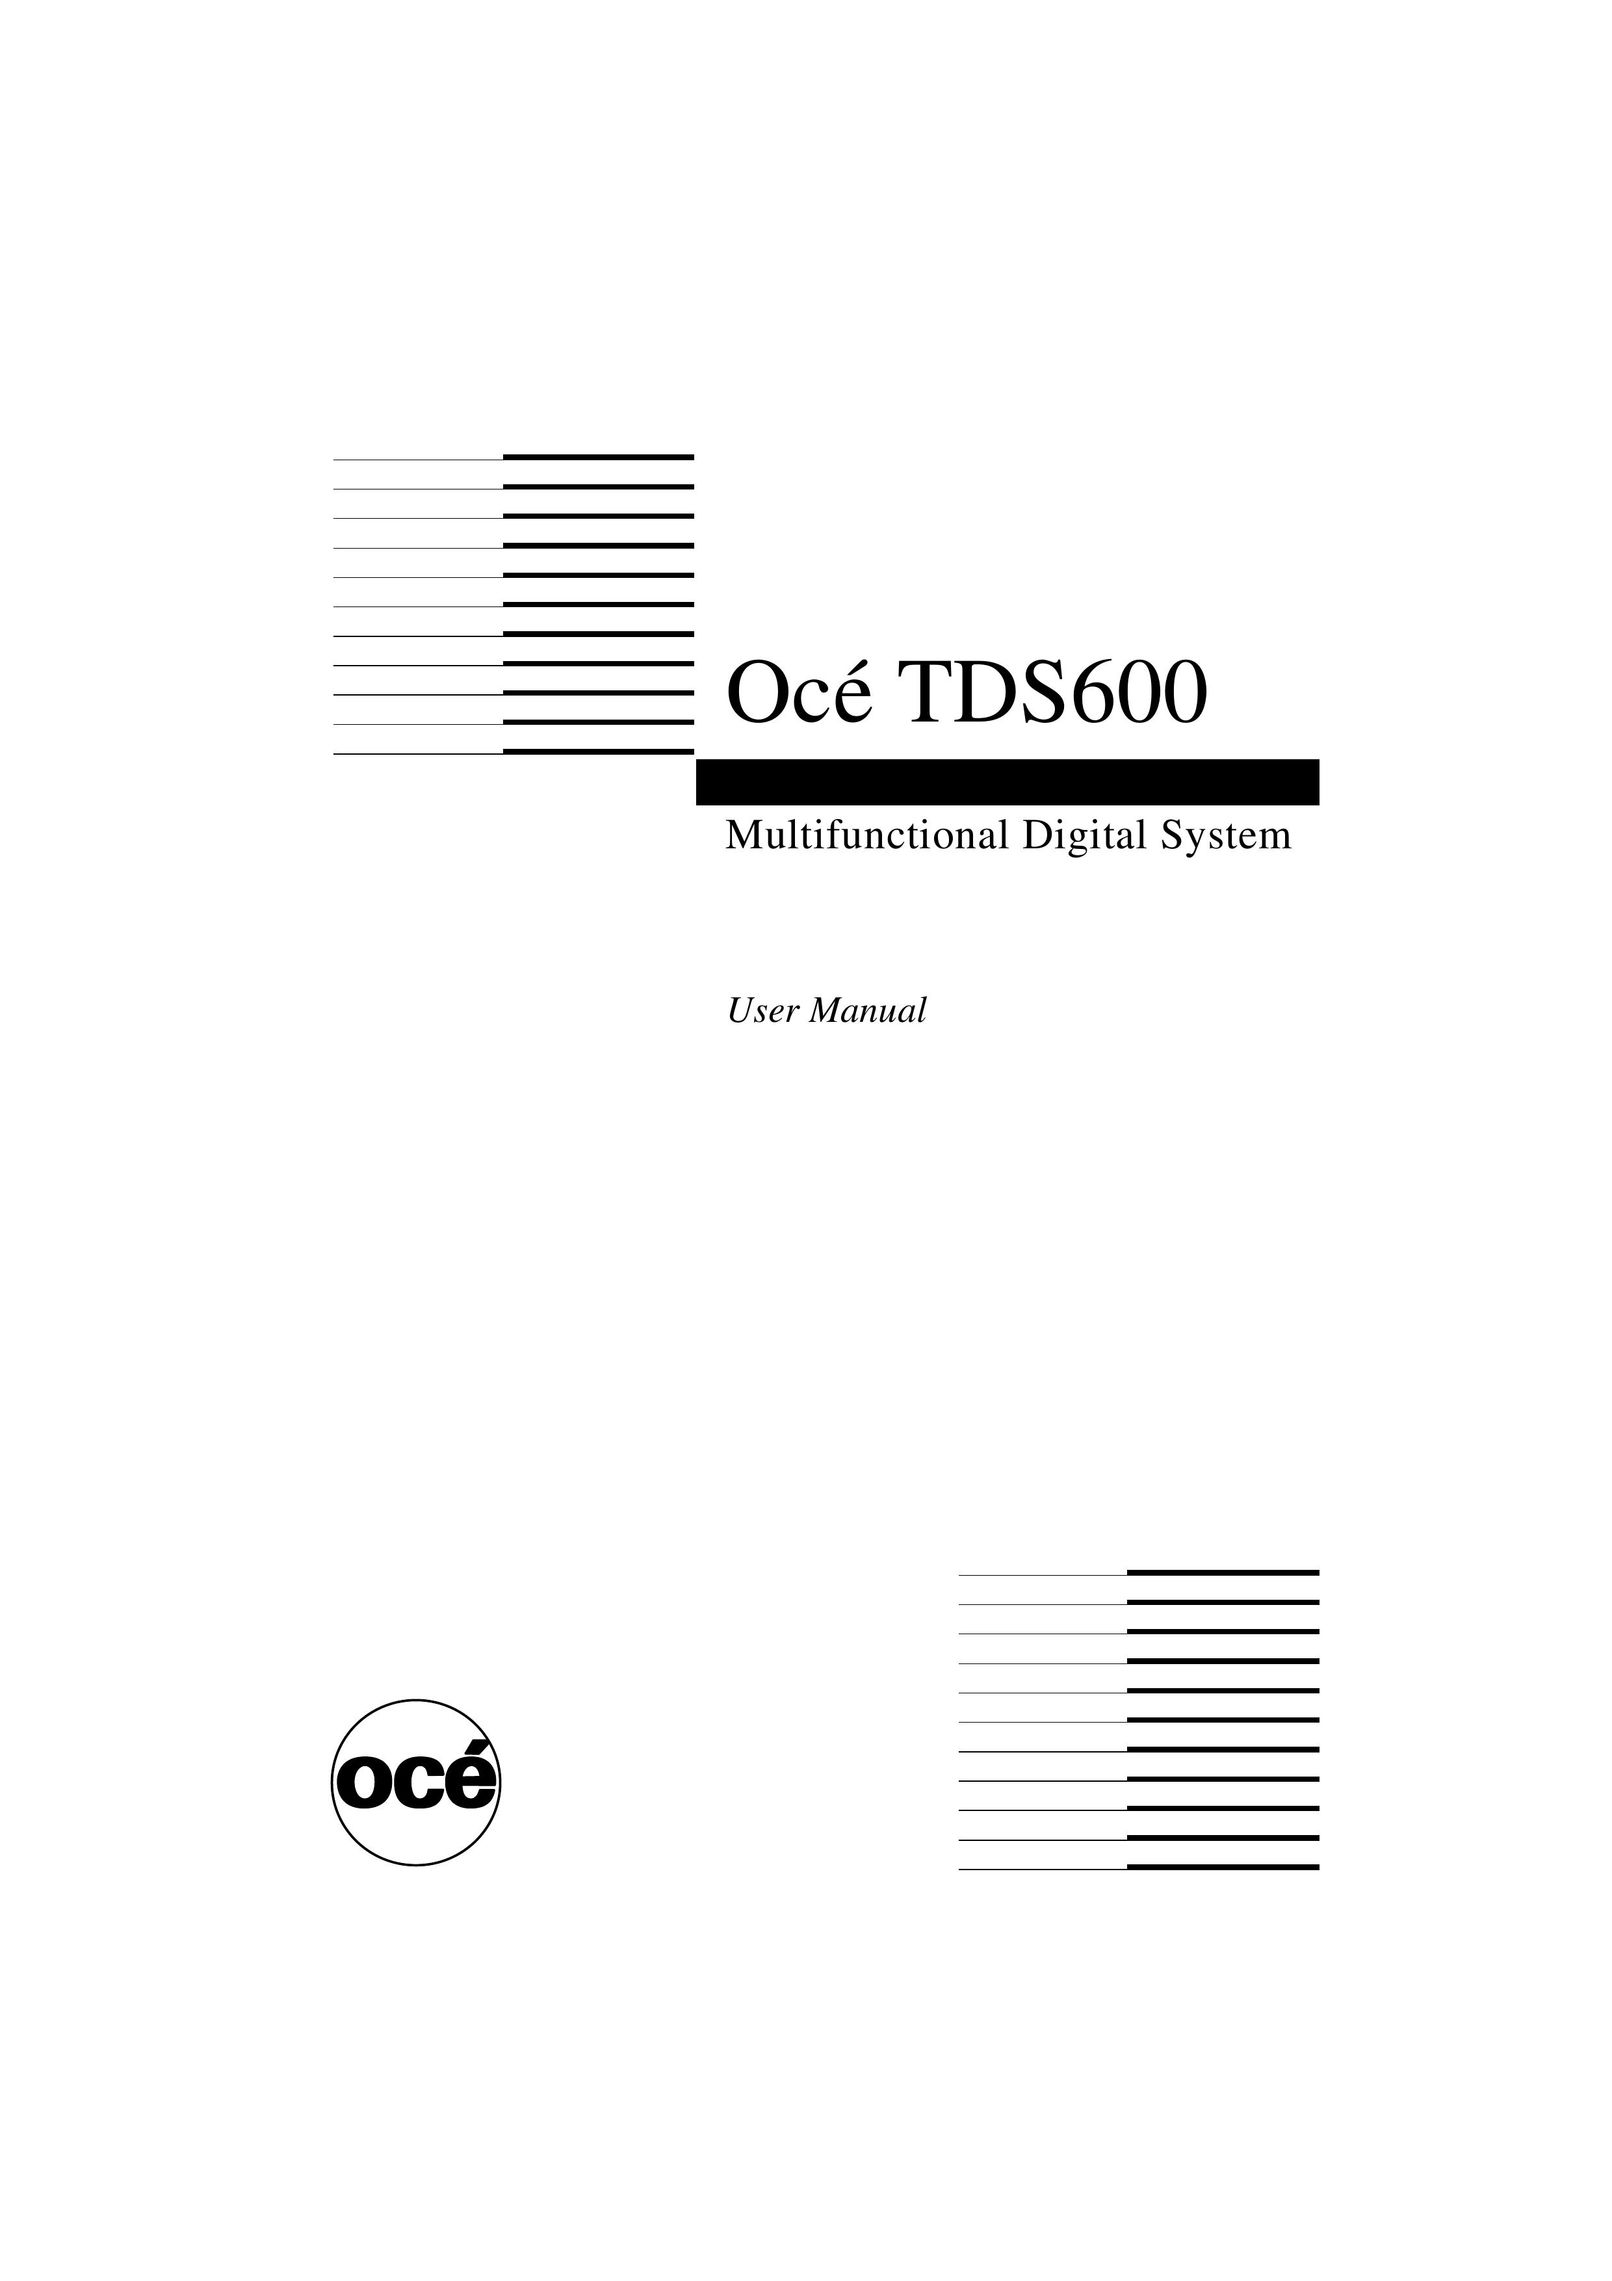 Oce North America TDS600 All in One Printer User Manual